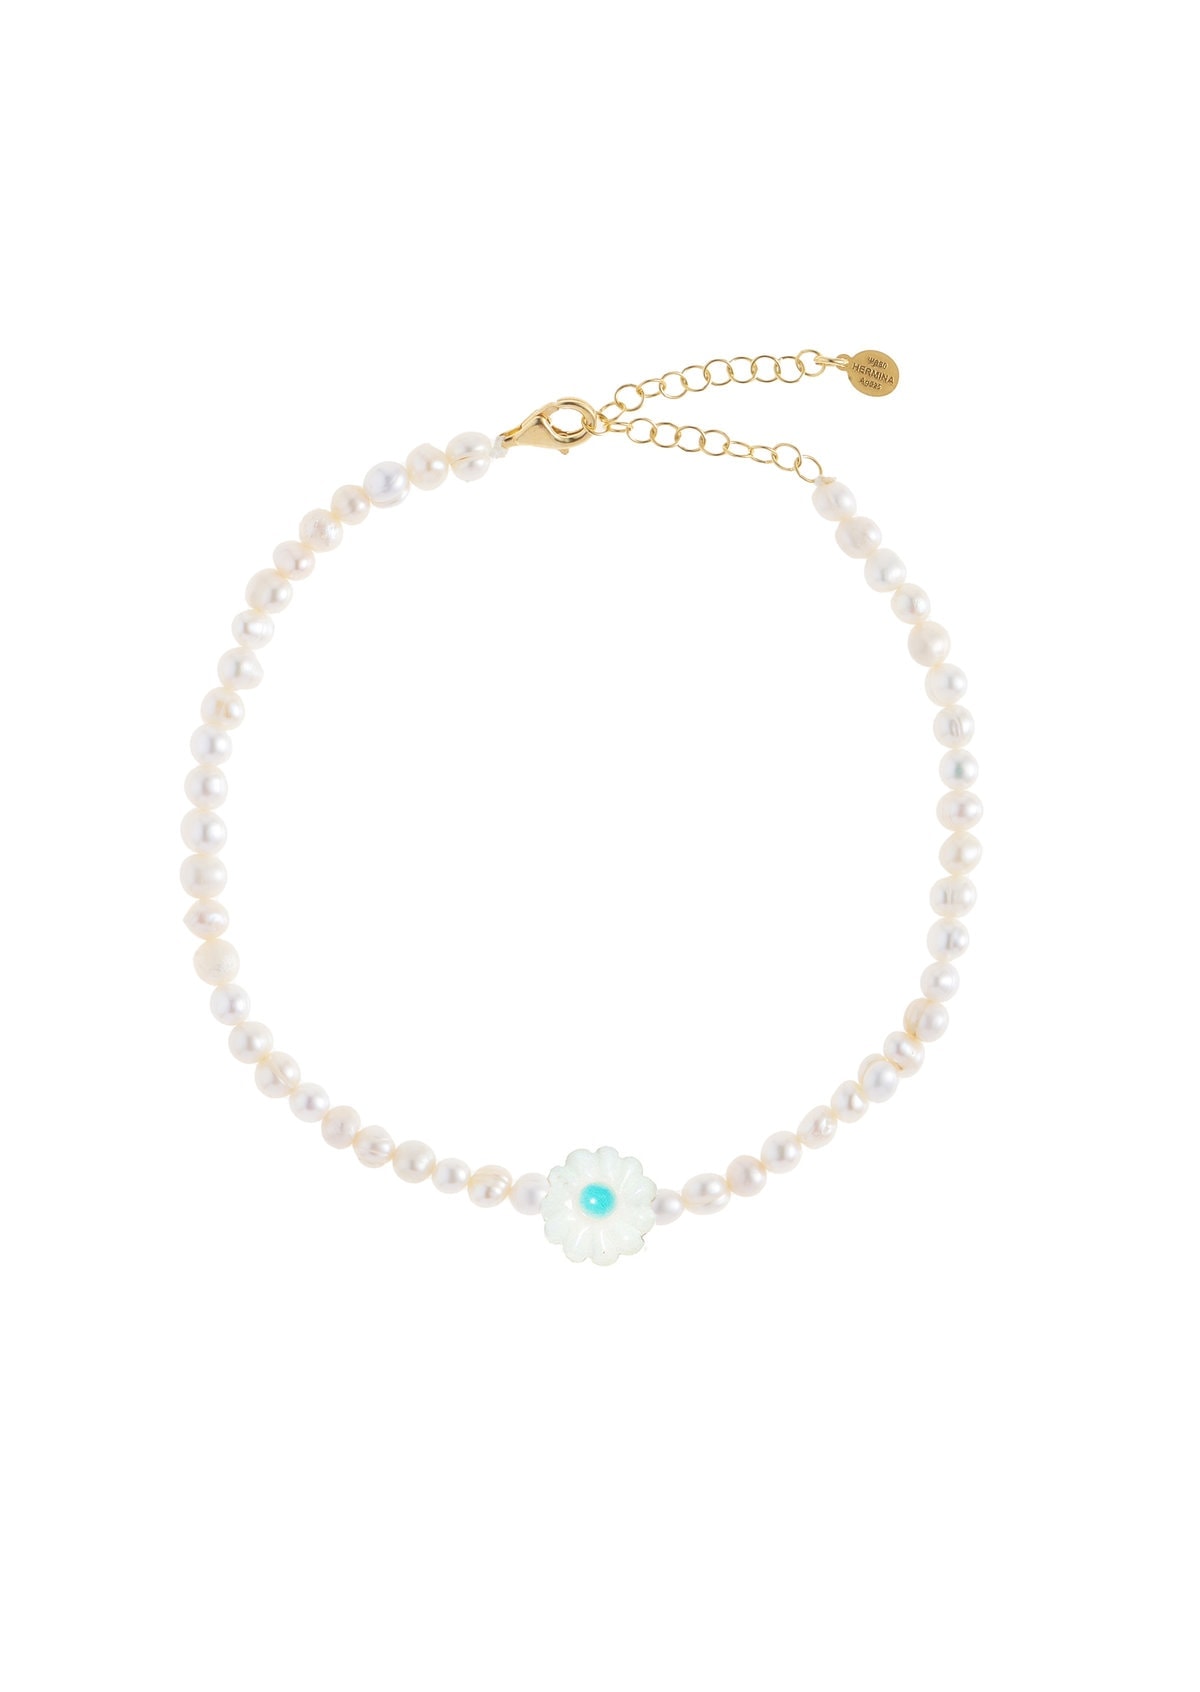 Avra Pearl Anklet Turquoise Daisy